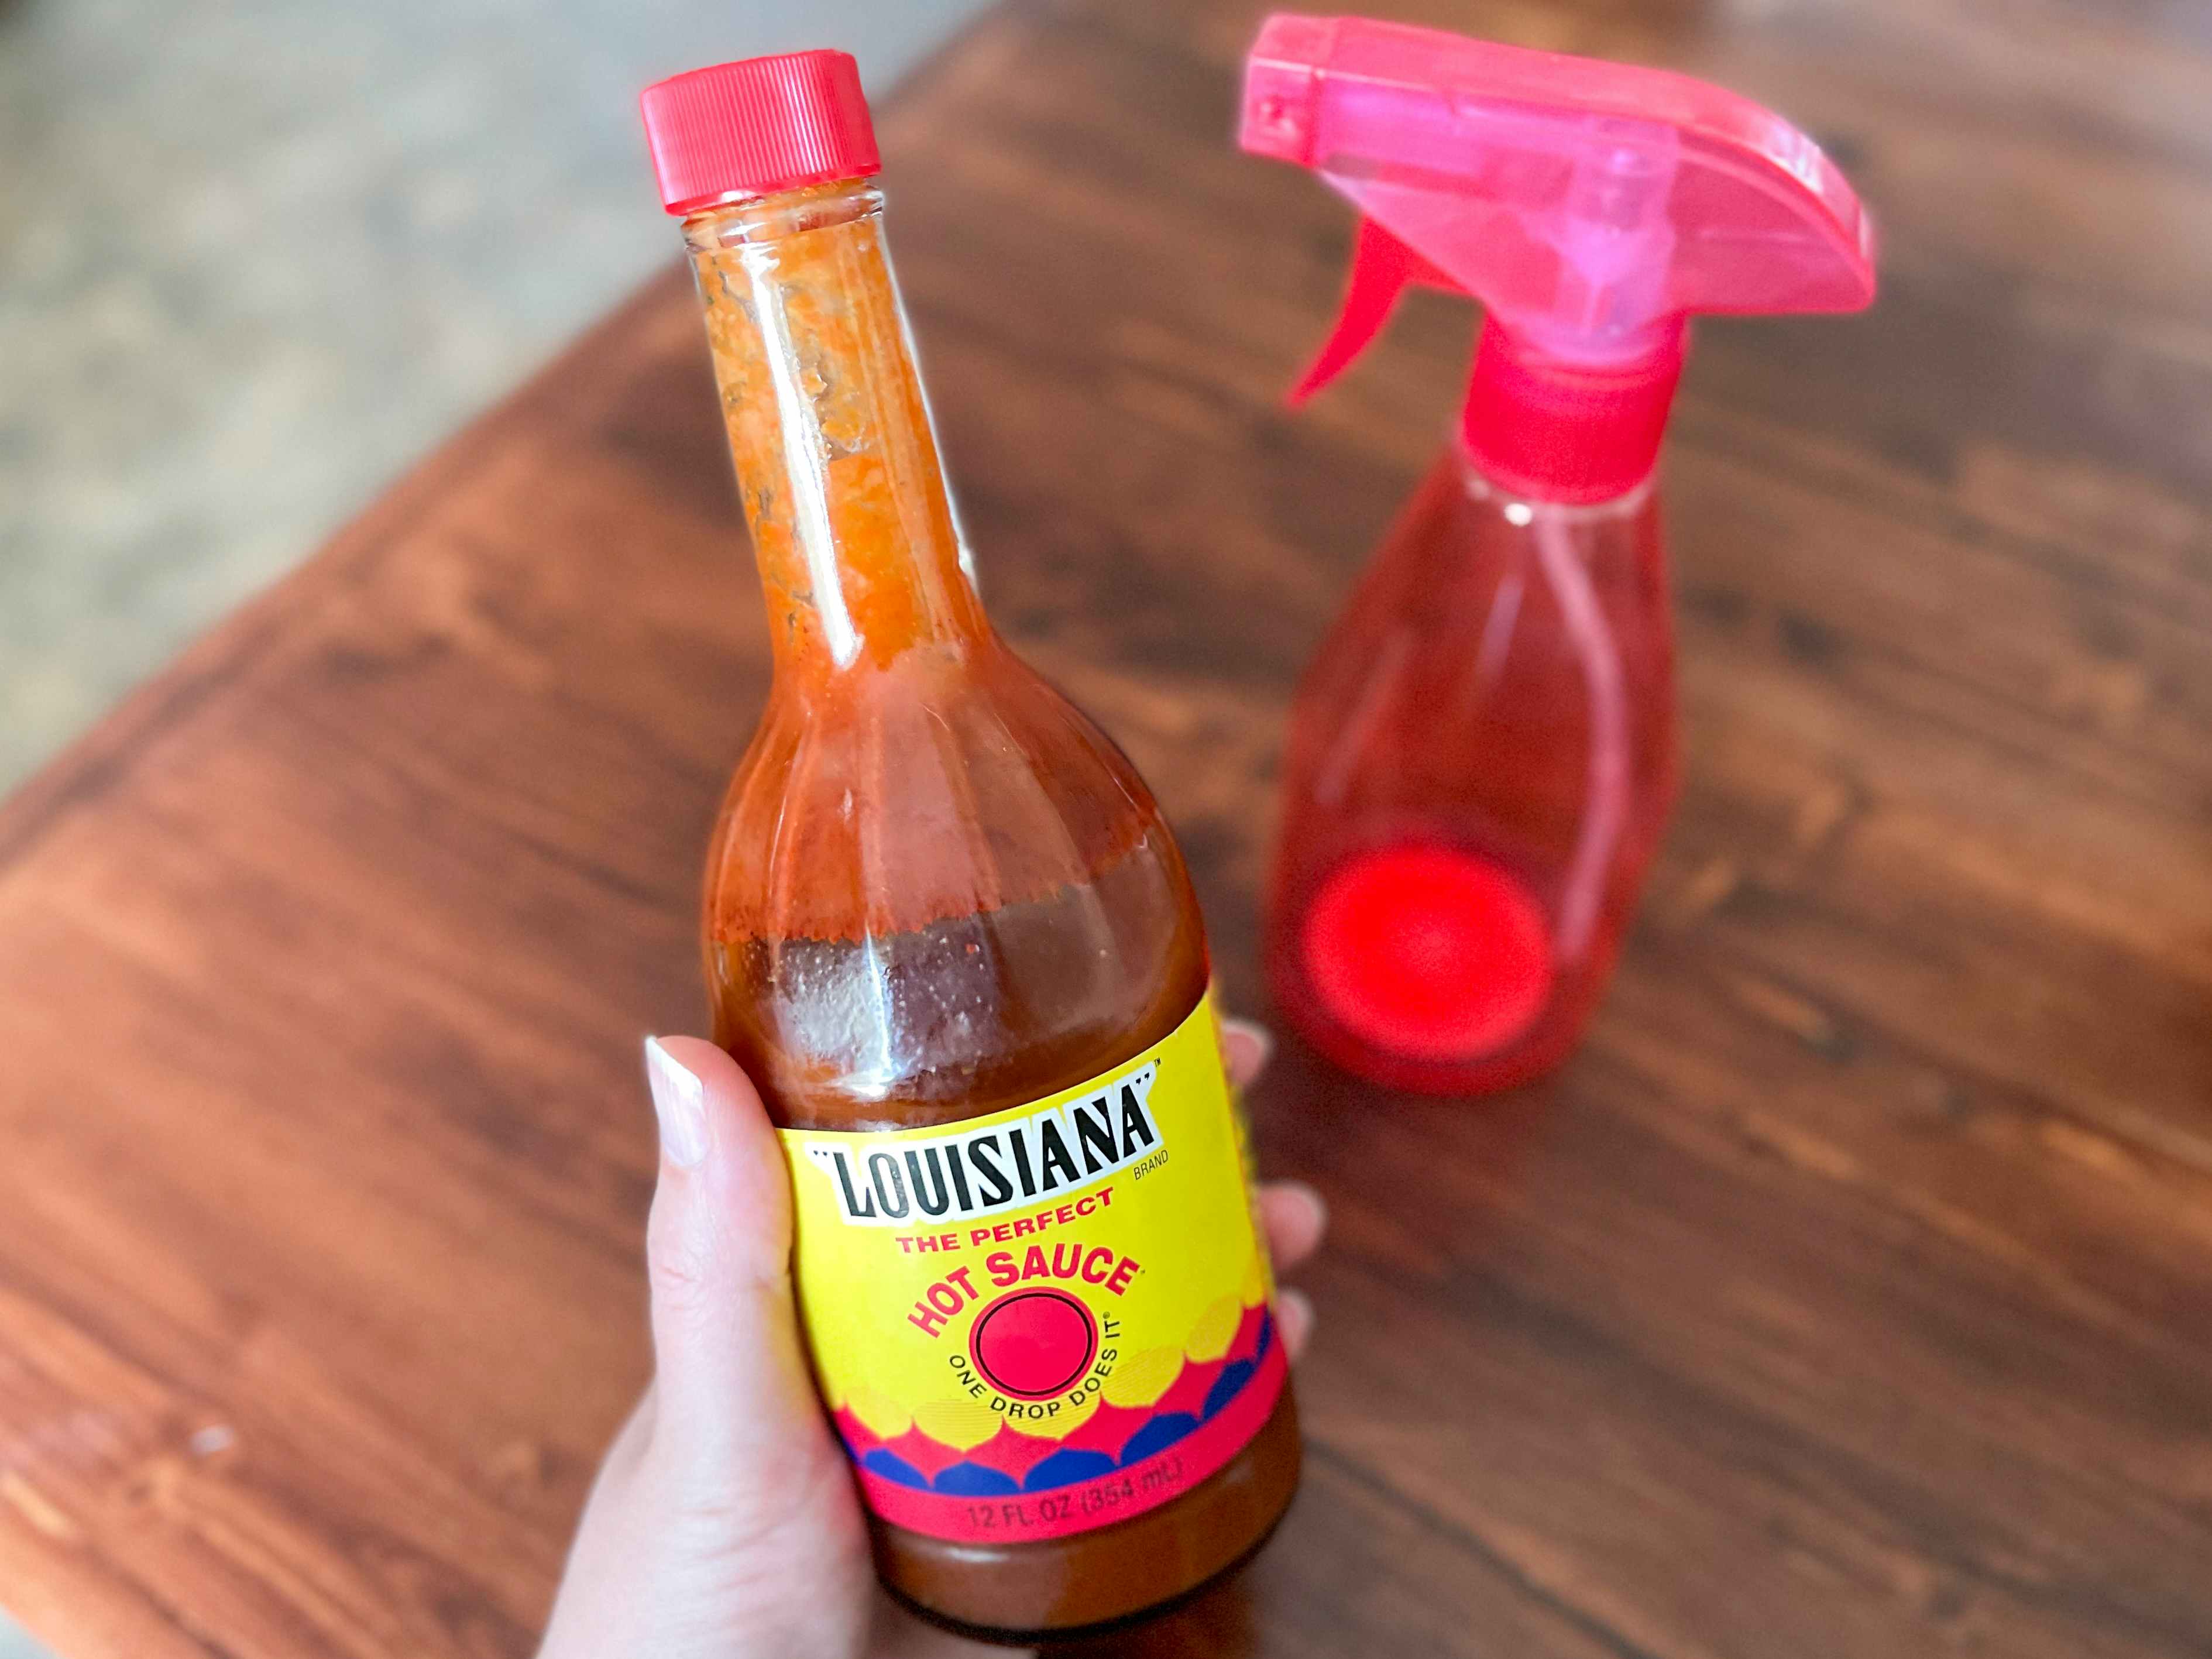 A bottle of hot sauce held next to a red spray bottle sitting on a table.